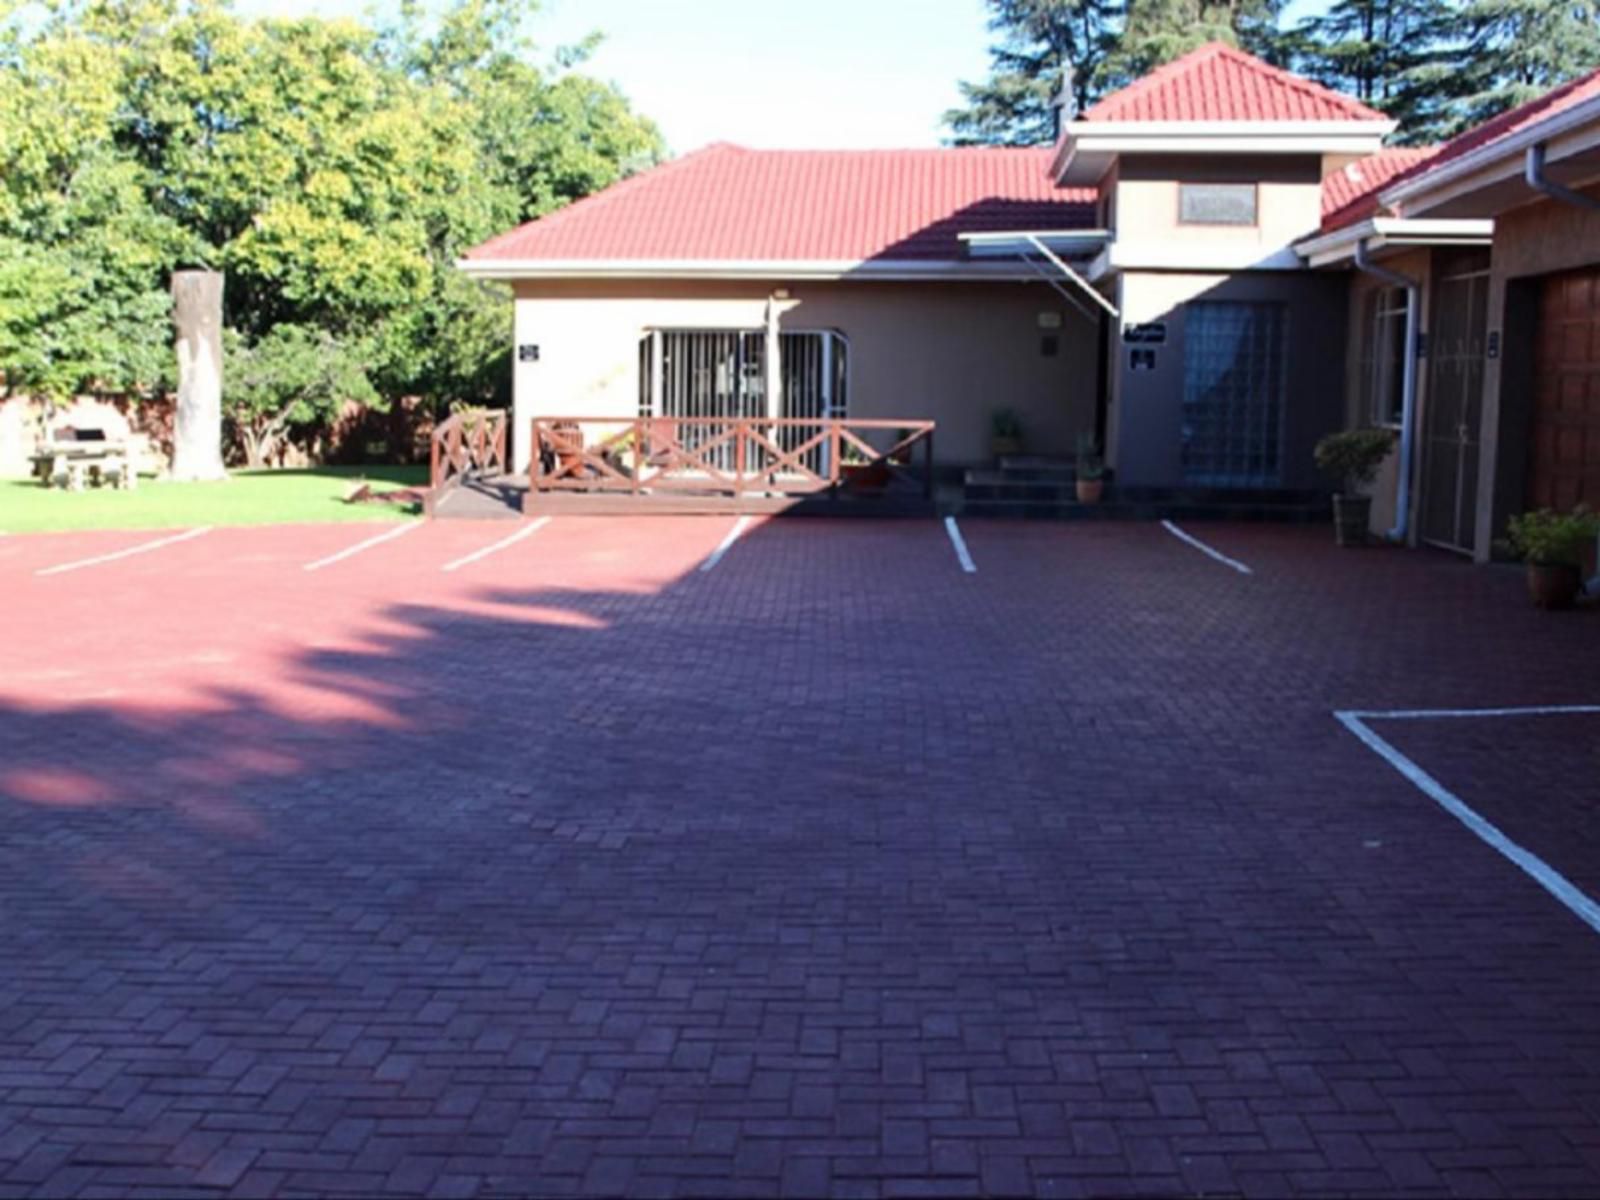 Aalwyns Guest House Vanderbijlpark Gauteng South Africa House, Building, Architecture